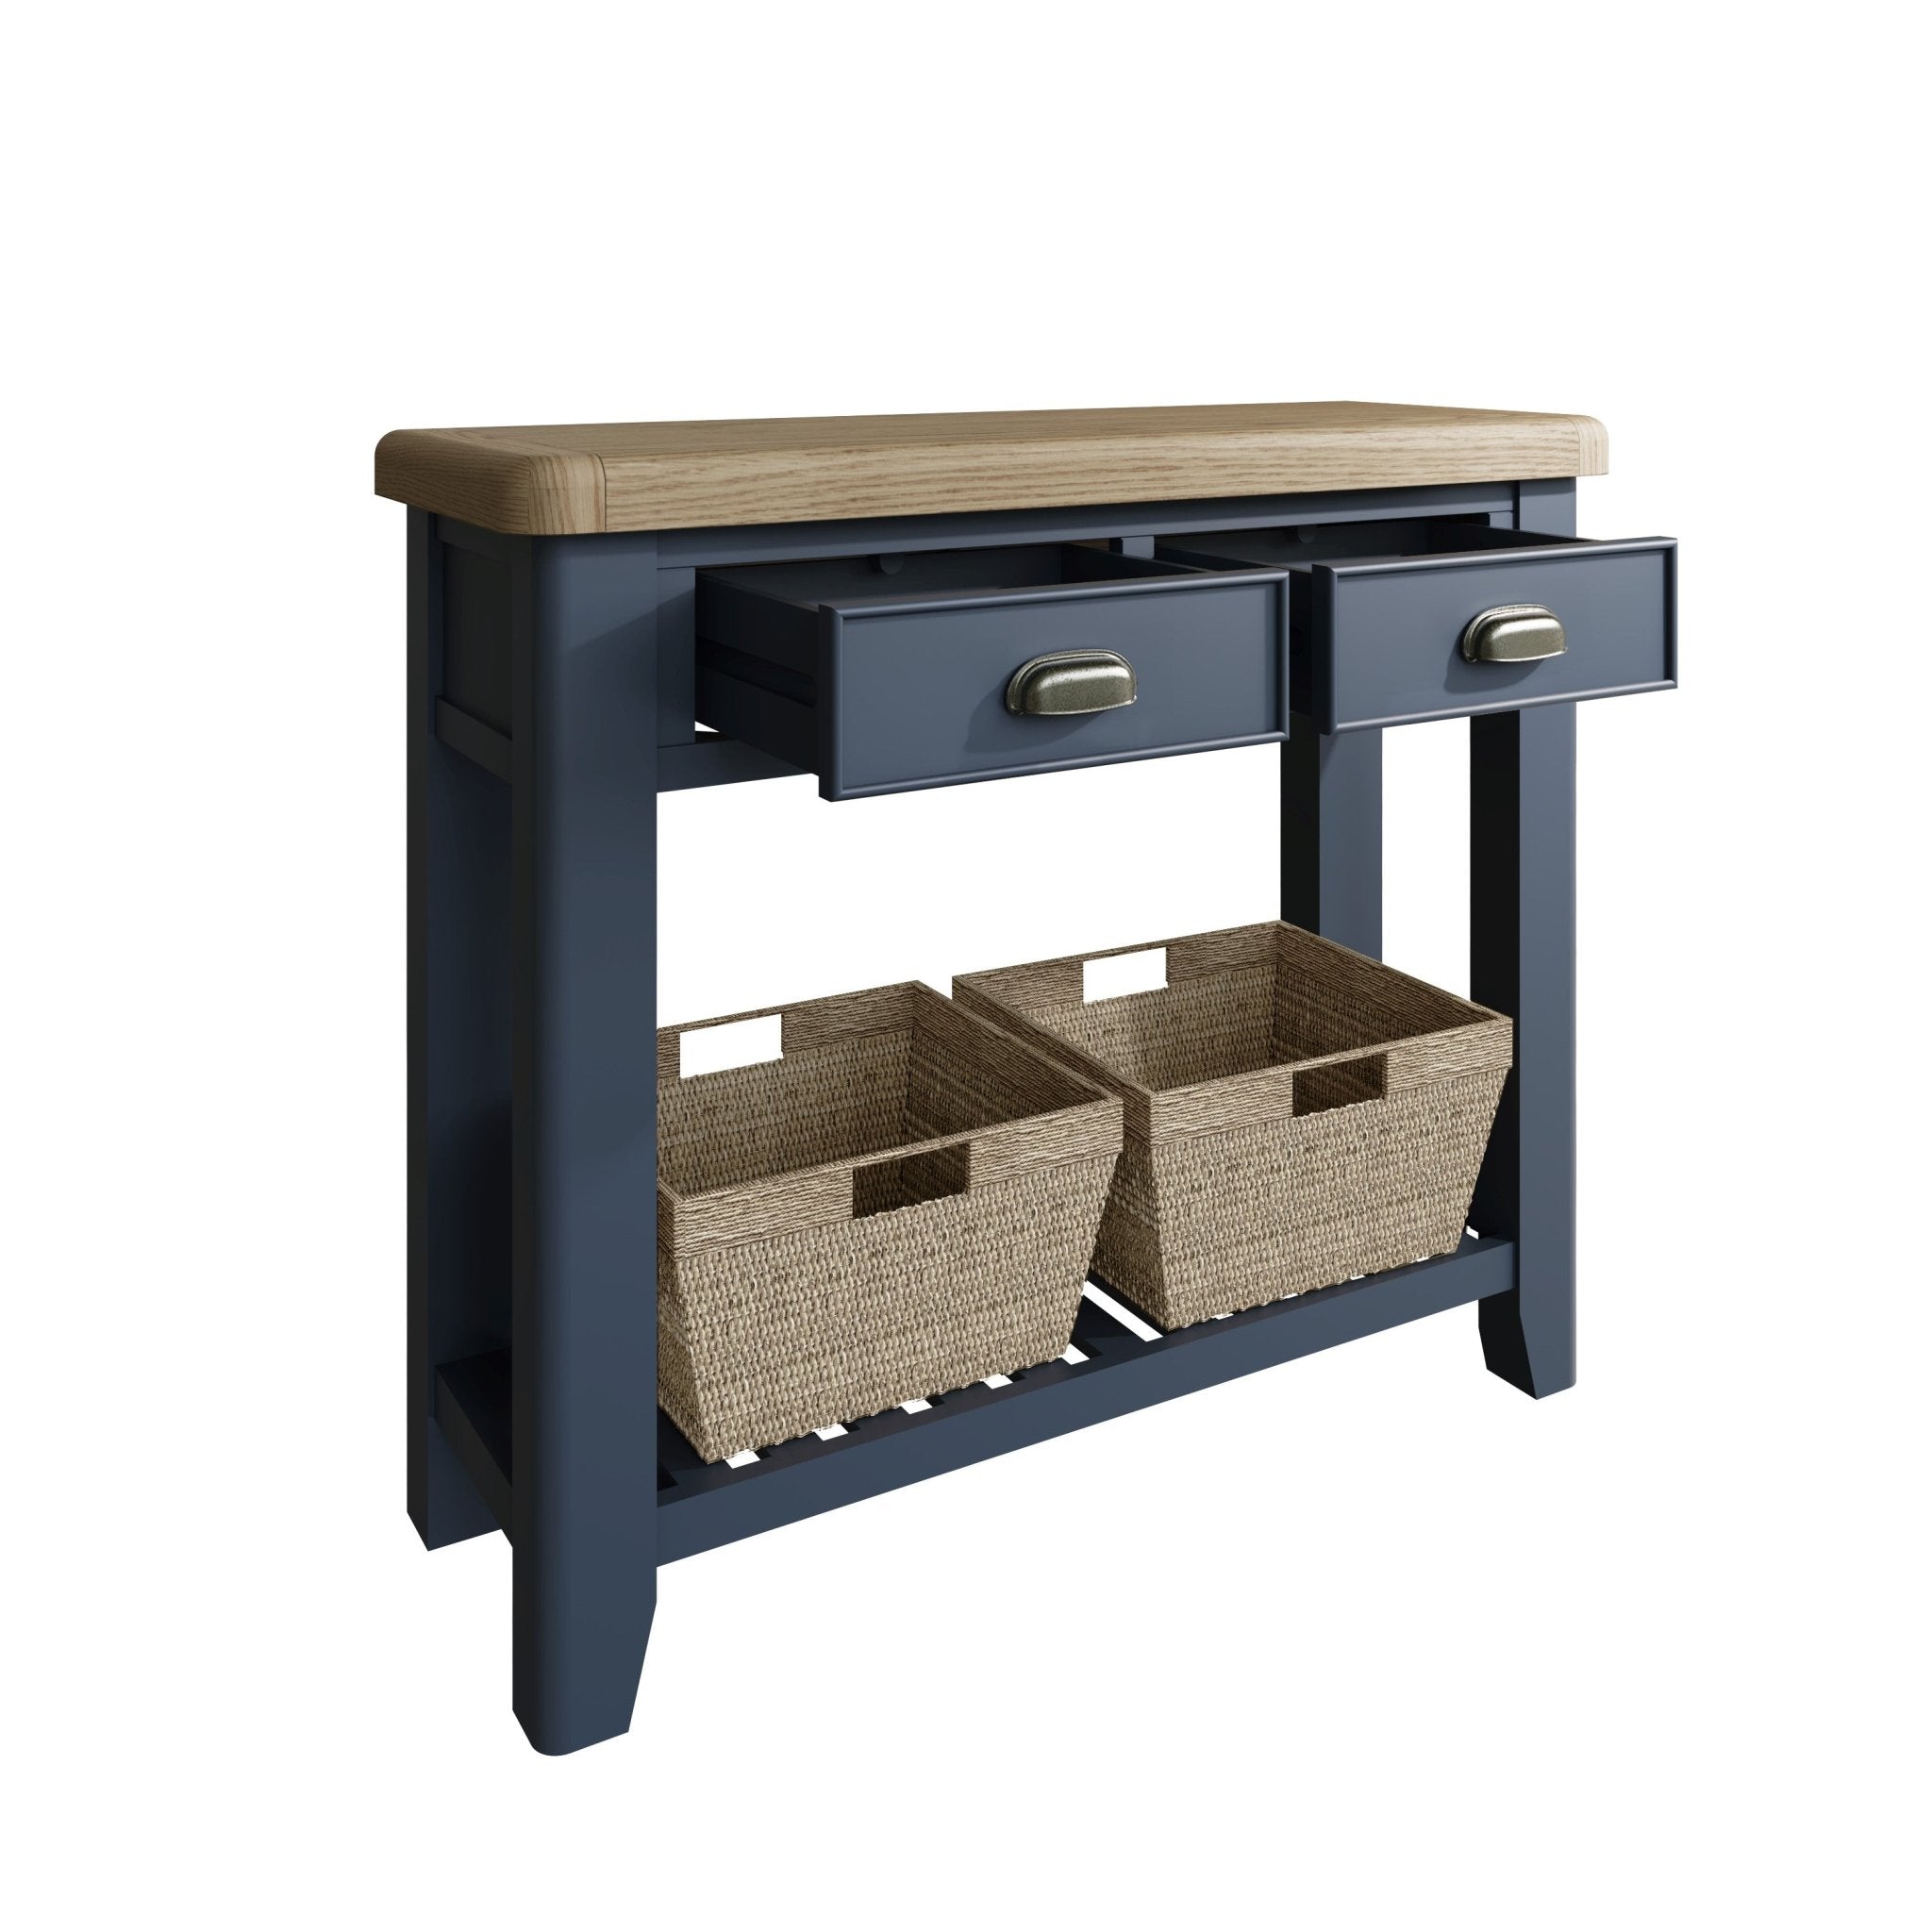 Rogate Blue Painted Console Table with 2 Baskets - Duck Barn Interiors